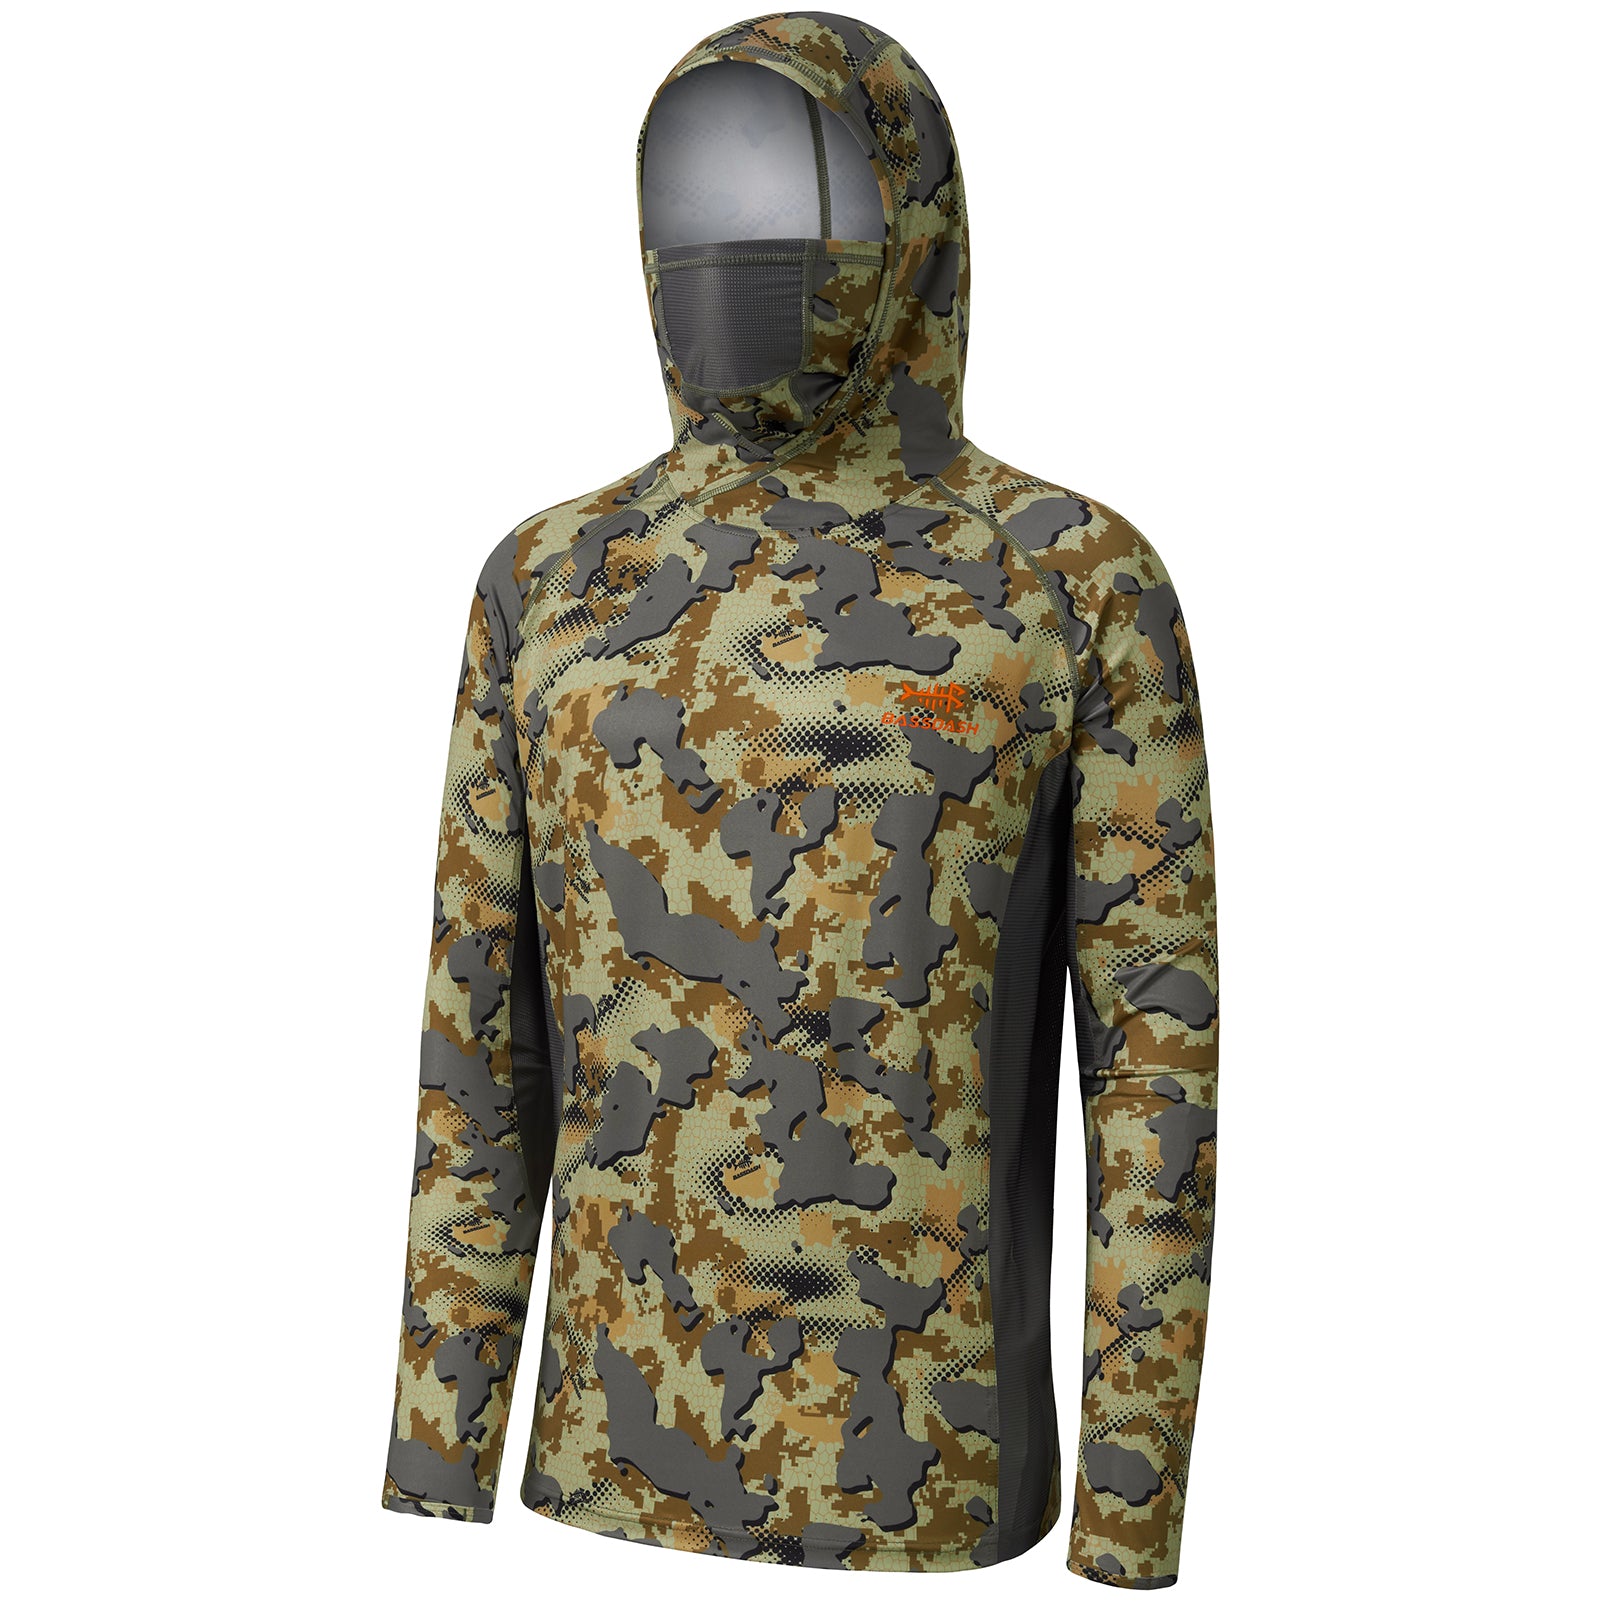 Men's Hunting Hoodies UPF 50 Long Sleeve with Mask | Bassdash Hunting Open Terrain / Small